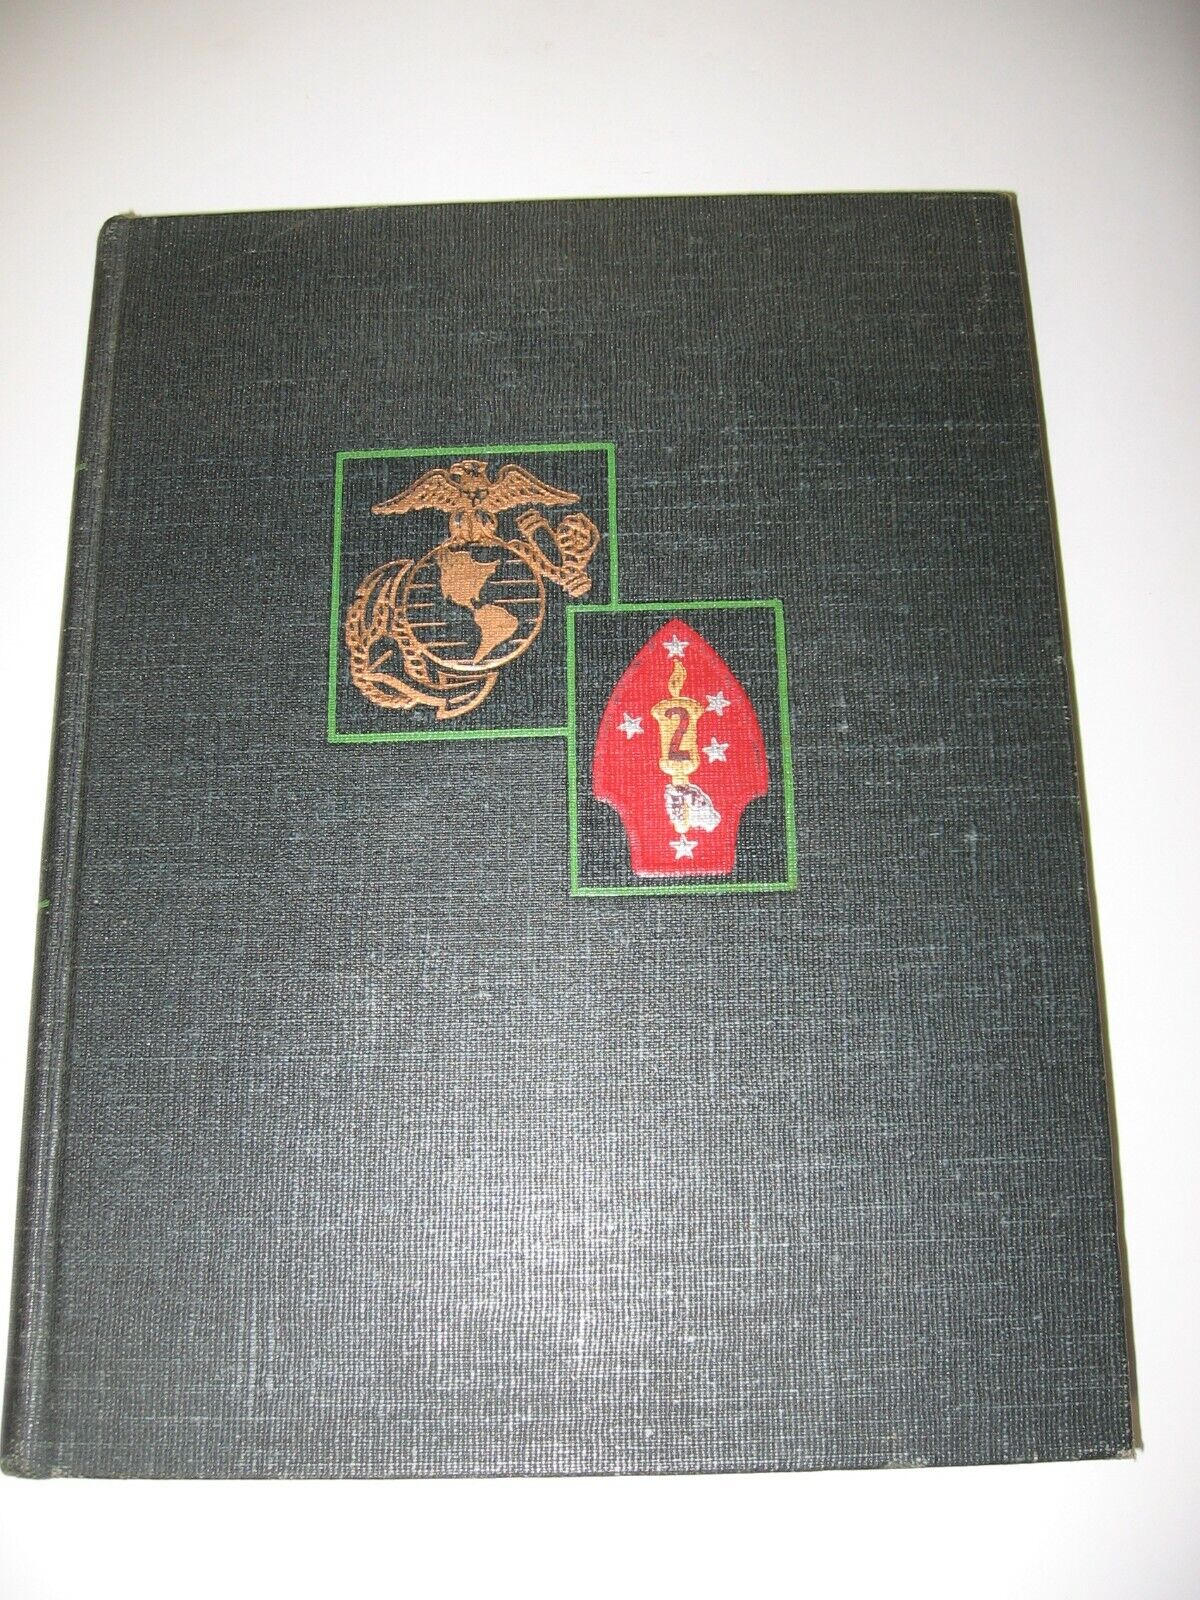 1948 Follow Me- Story Of 2nd Marine Division In Ww2, 1st Print, By R. Johnston